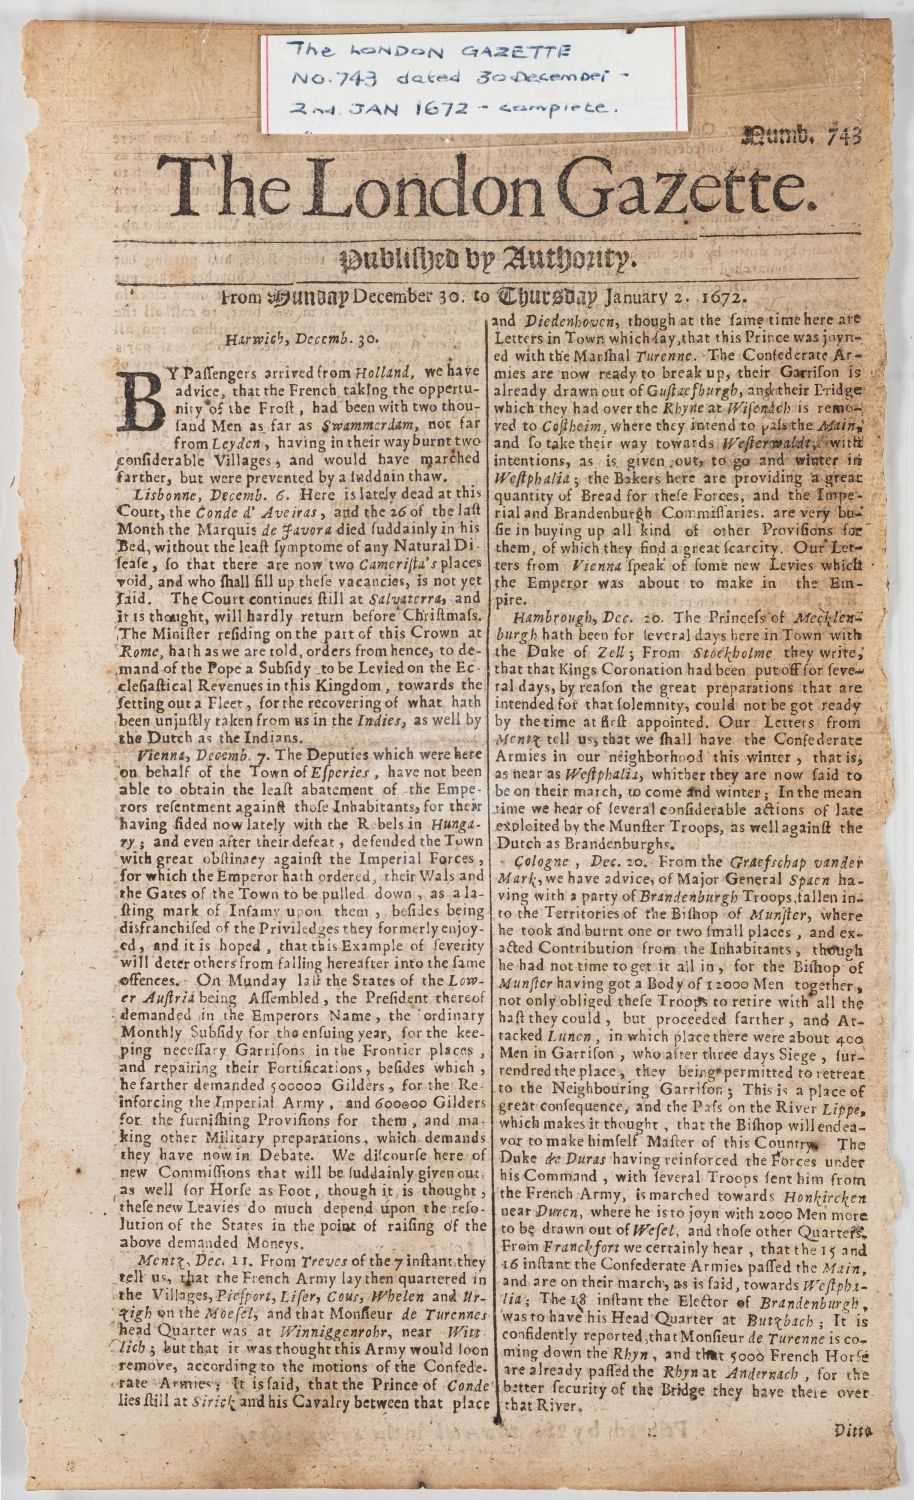 LONDON GAZETTE. No. 743, December 30 to January 2 1672, 2pp, complete; and No.